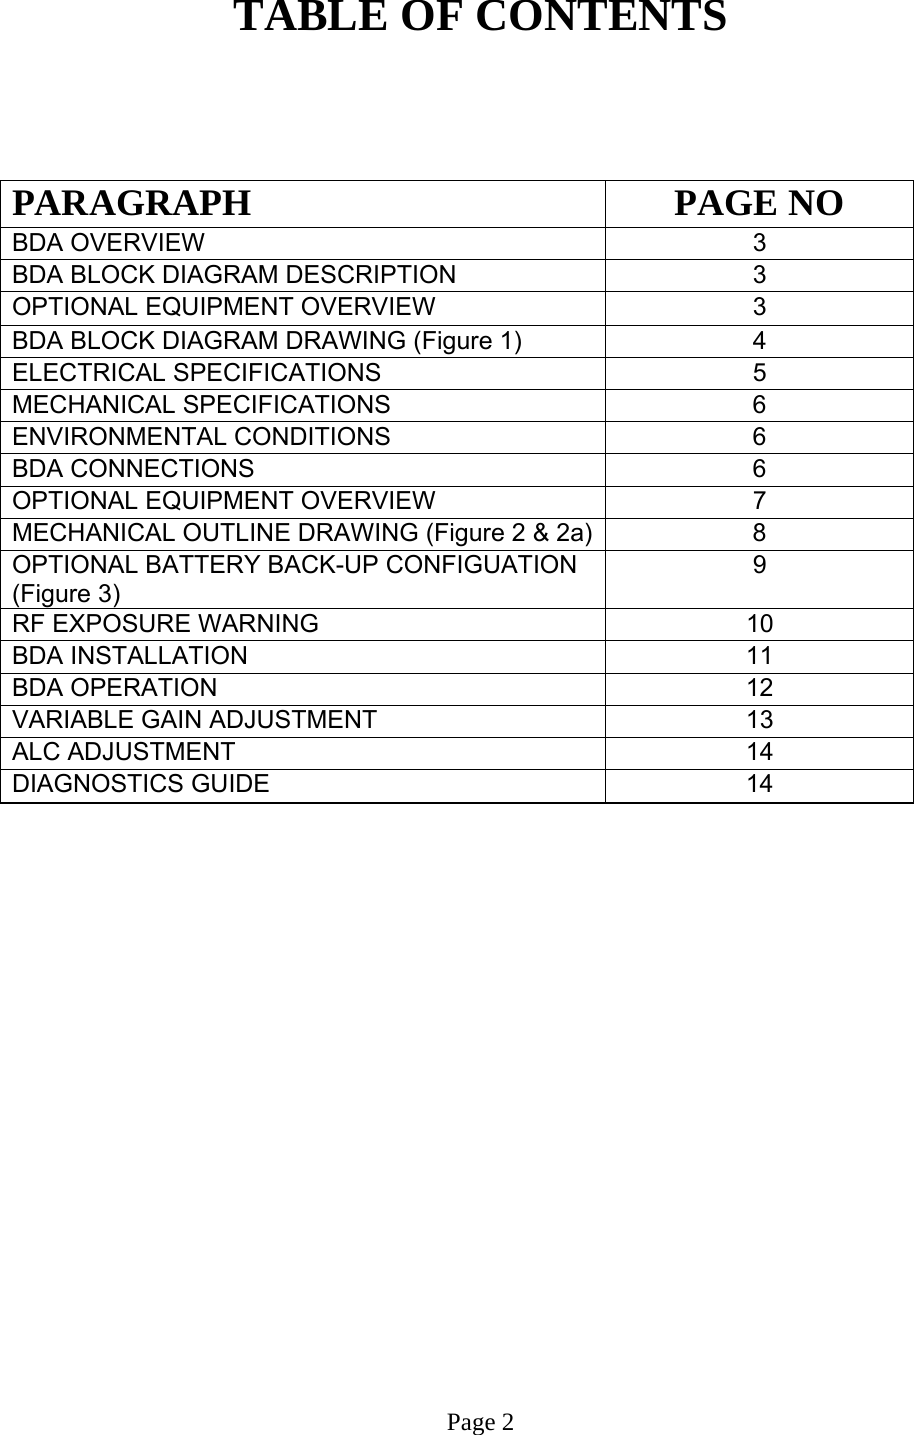 TABLE OF CONTENTS    PARAGRAPH PAGE NO BDA OVERVIEW   3 BDA BLOCK DIAGRAM DESCRIPTION 3 OPTIONAL EQUIPMENT OVERVIEW 3 BDA BLOCK DIAGRAM DRAWING (Figure 1)  4 ELECTRICAL SPECIFICATIONS   5  MECHANICAL SPECIFICATIONS   6 ENVIRONMENTAL CONDITIONS   6  BDA CONNECTIONS    6  OPTIONAL EQUIPMENT OVERVIEW  7 MECHANICAL OUTLINE DRAWING (Figure 2 &amp; 2a) 8 OPTIONAL BATTERY BACK-UP CONFIGUATION (Figure 3) 9 RF EXPOSURE WARNING   10  BDA INSTALLATION  11  BDA OPERATION 12  VARIABLE GAIN ADJUSTMENT   13  ALC ADJUSTMENT   14 DIAGNOSTICS GUIDE  14                       Page 2   